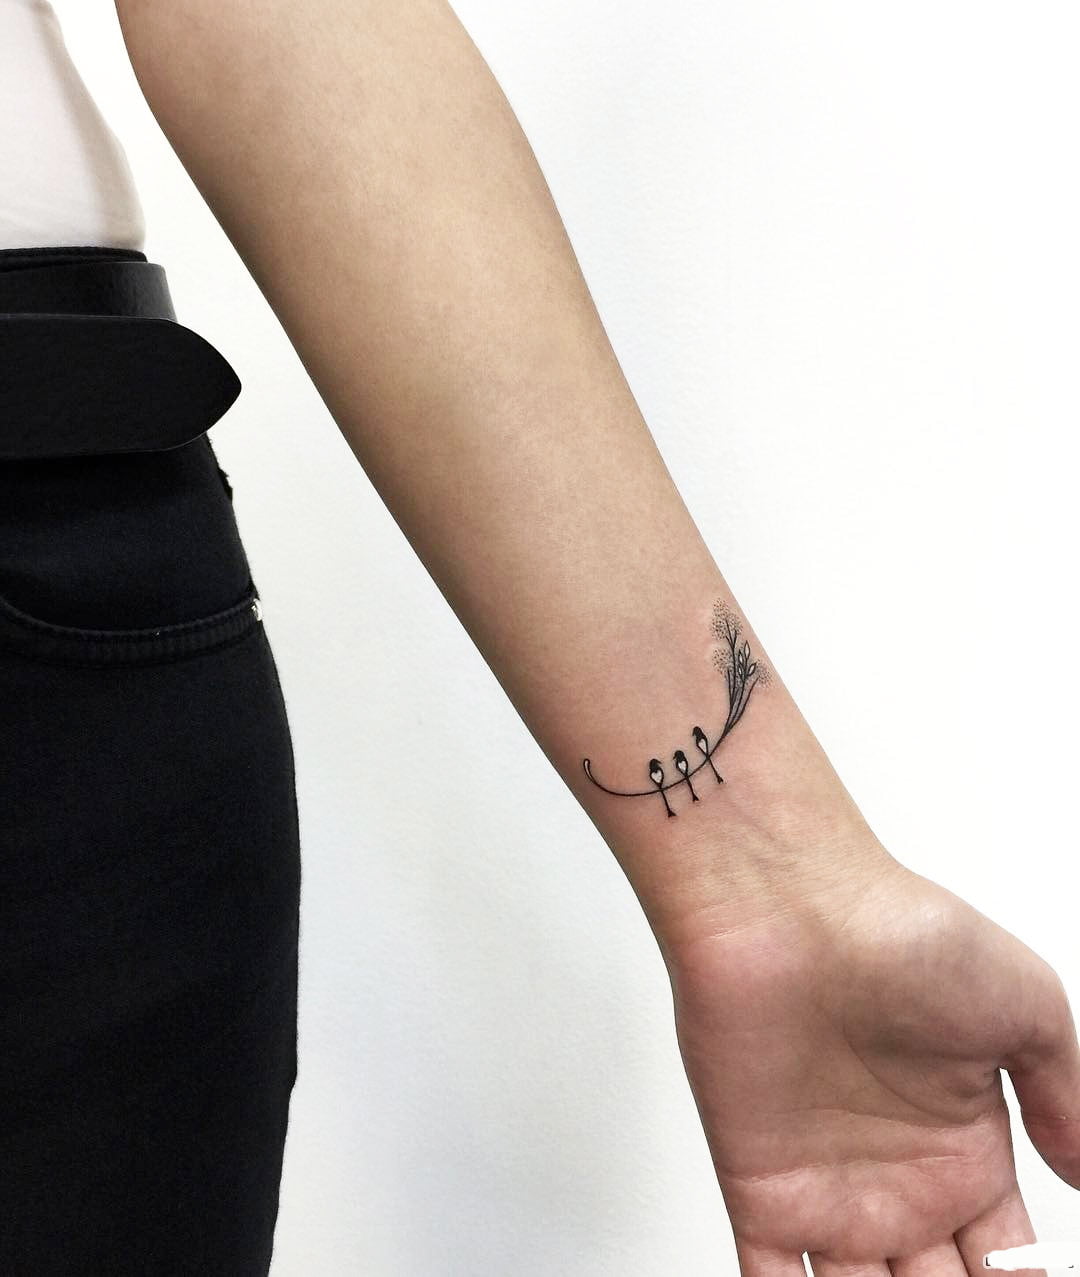 17 Meaningful Small Wrist Tattoos For Women in 2023 11